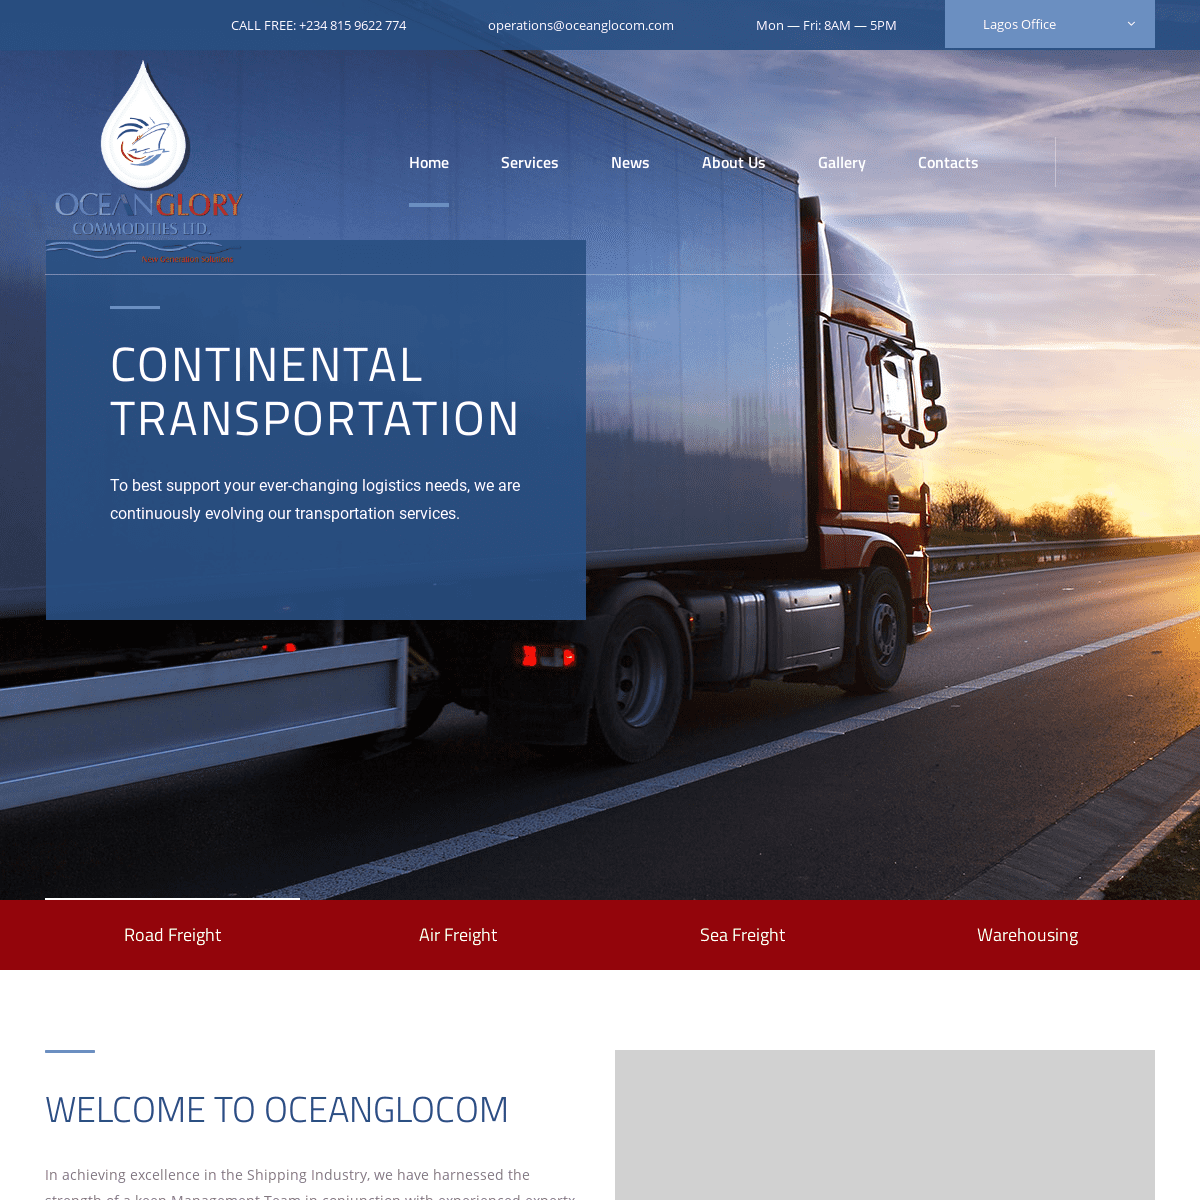 Oceanglory Commodities Limited – Just another WordPress site